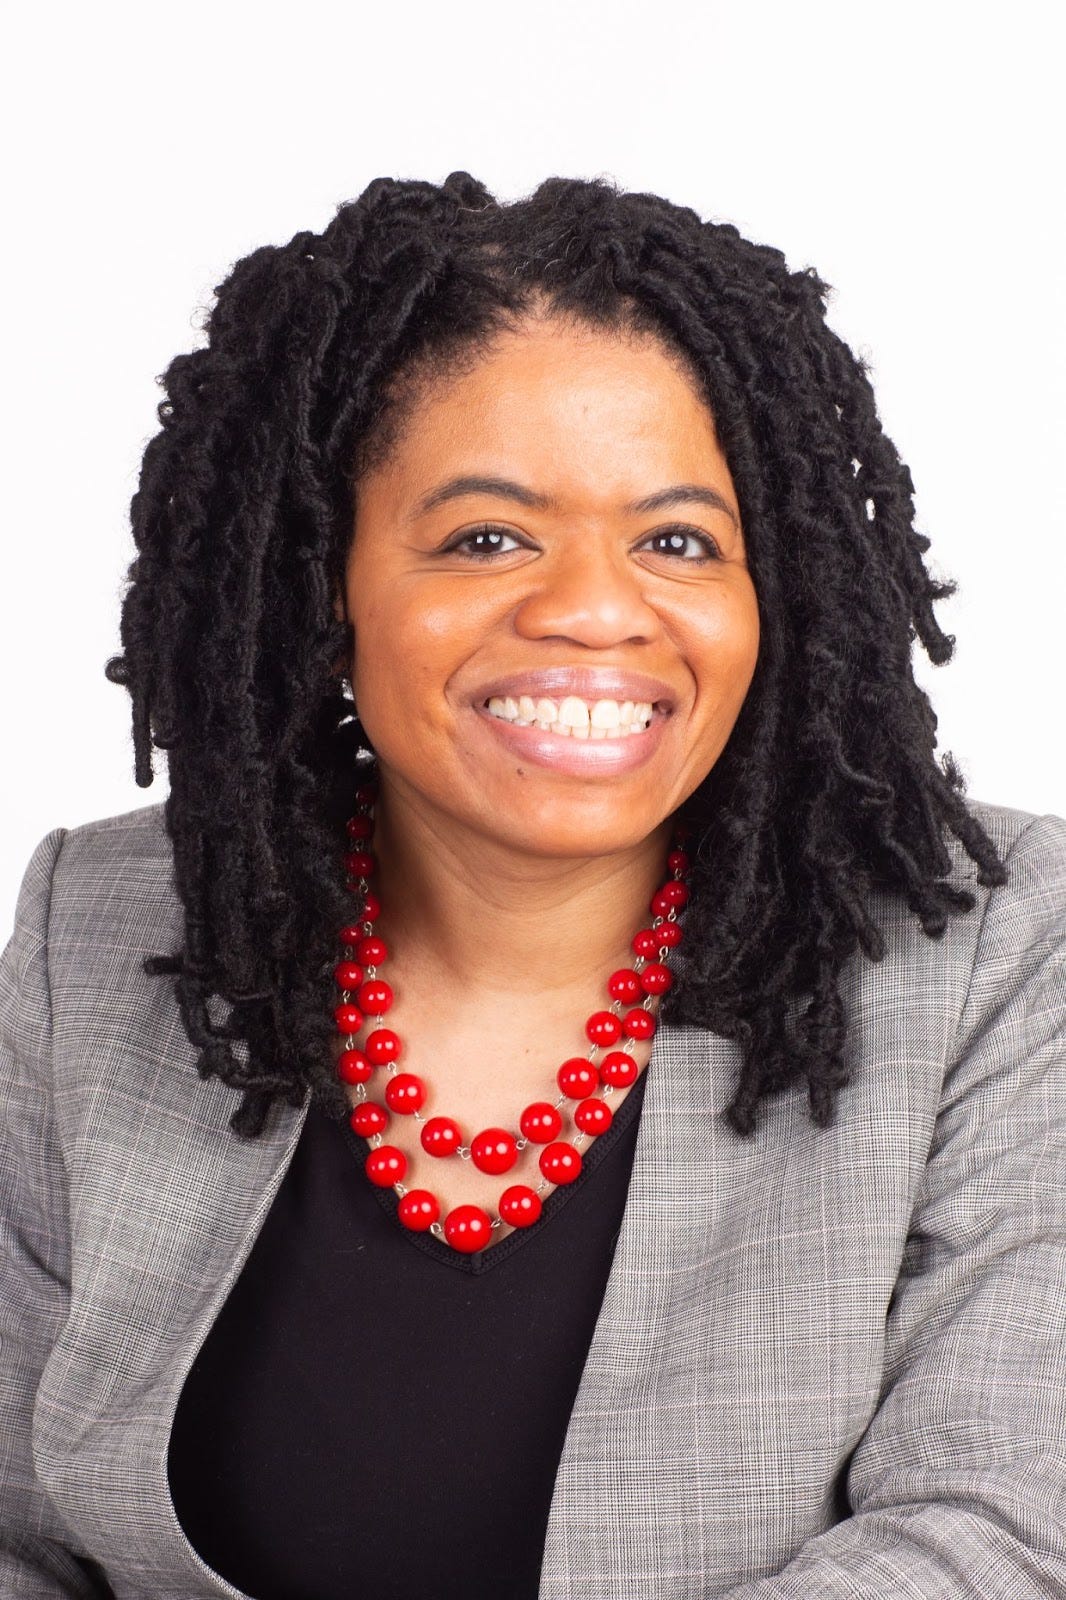 A photo of a smiling Black woman with shoulder-length locs. She is wearing a grey suit jacket and red necklace.